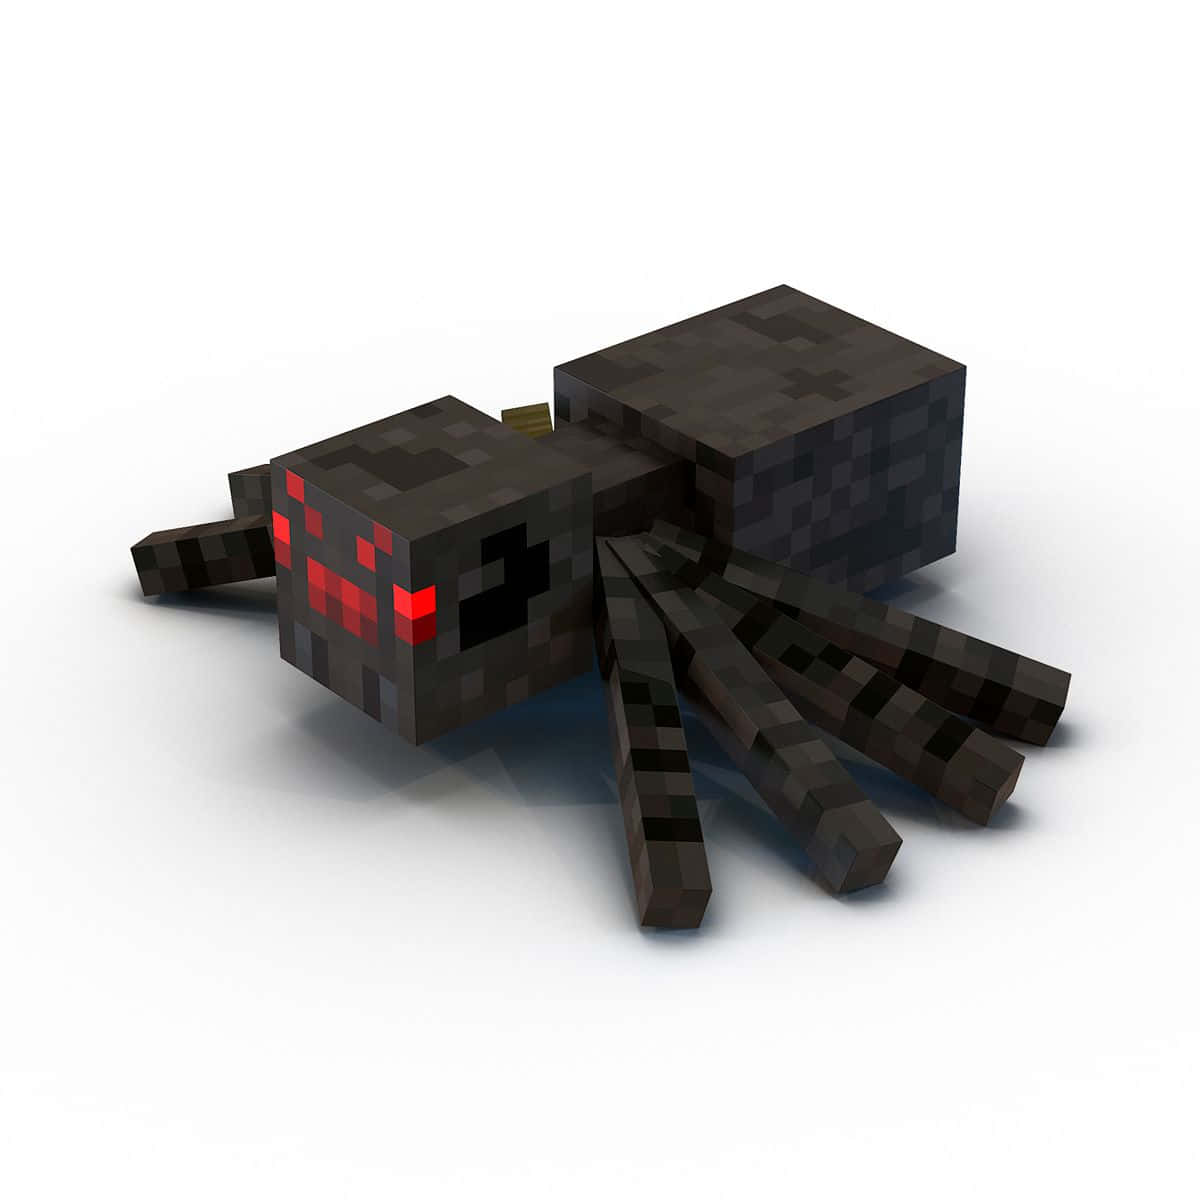 Caption: A close-up encounter with a Minecraft spider in its natural habitat. Wallpaper